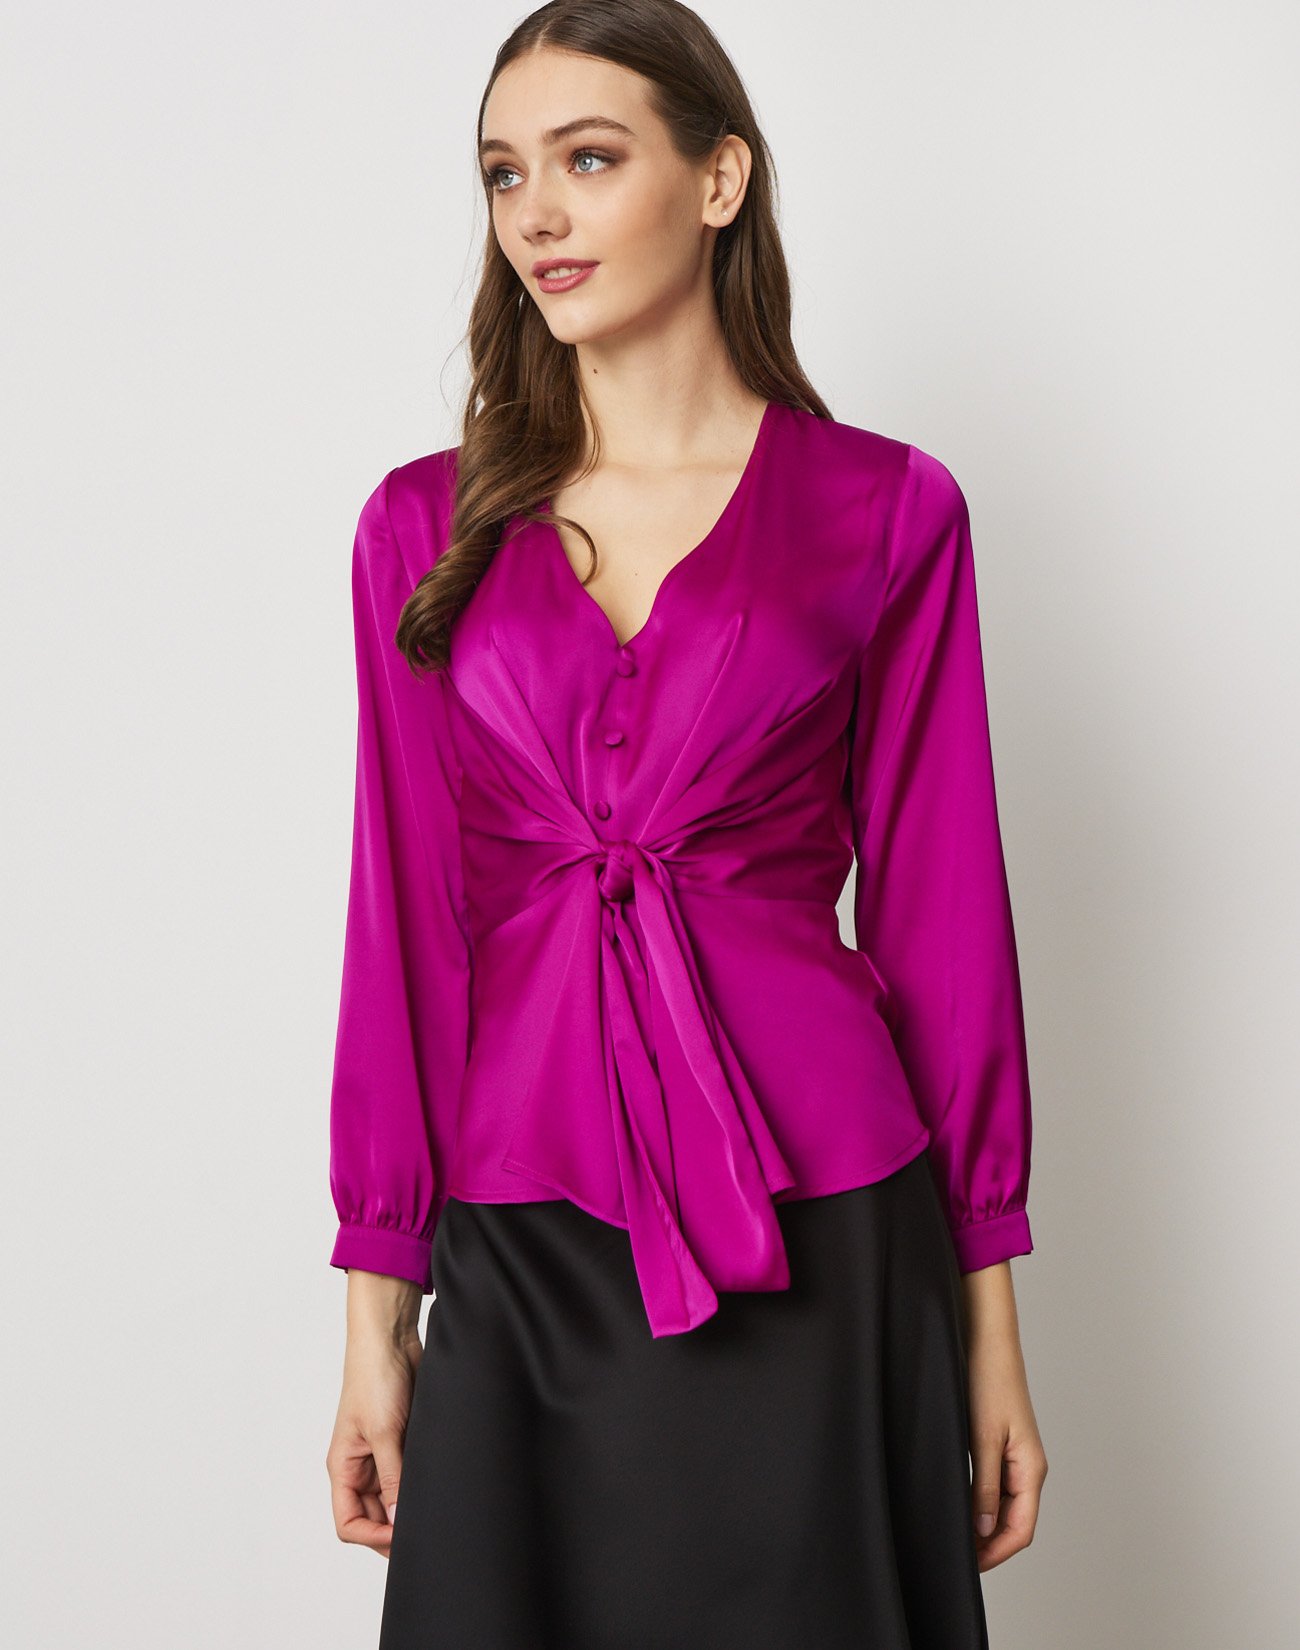 Satin top with knot